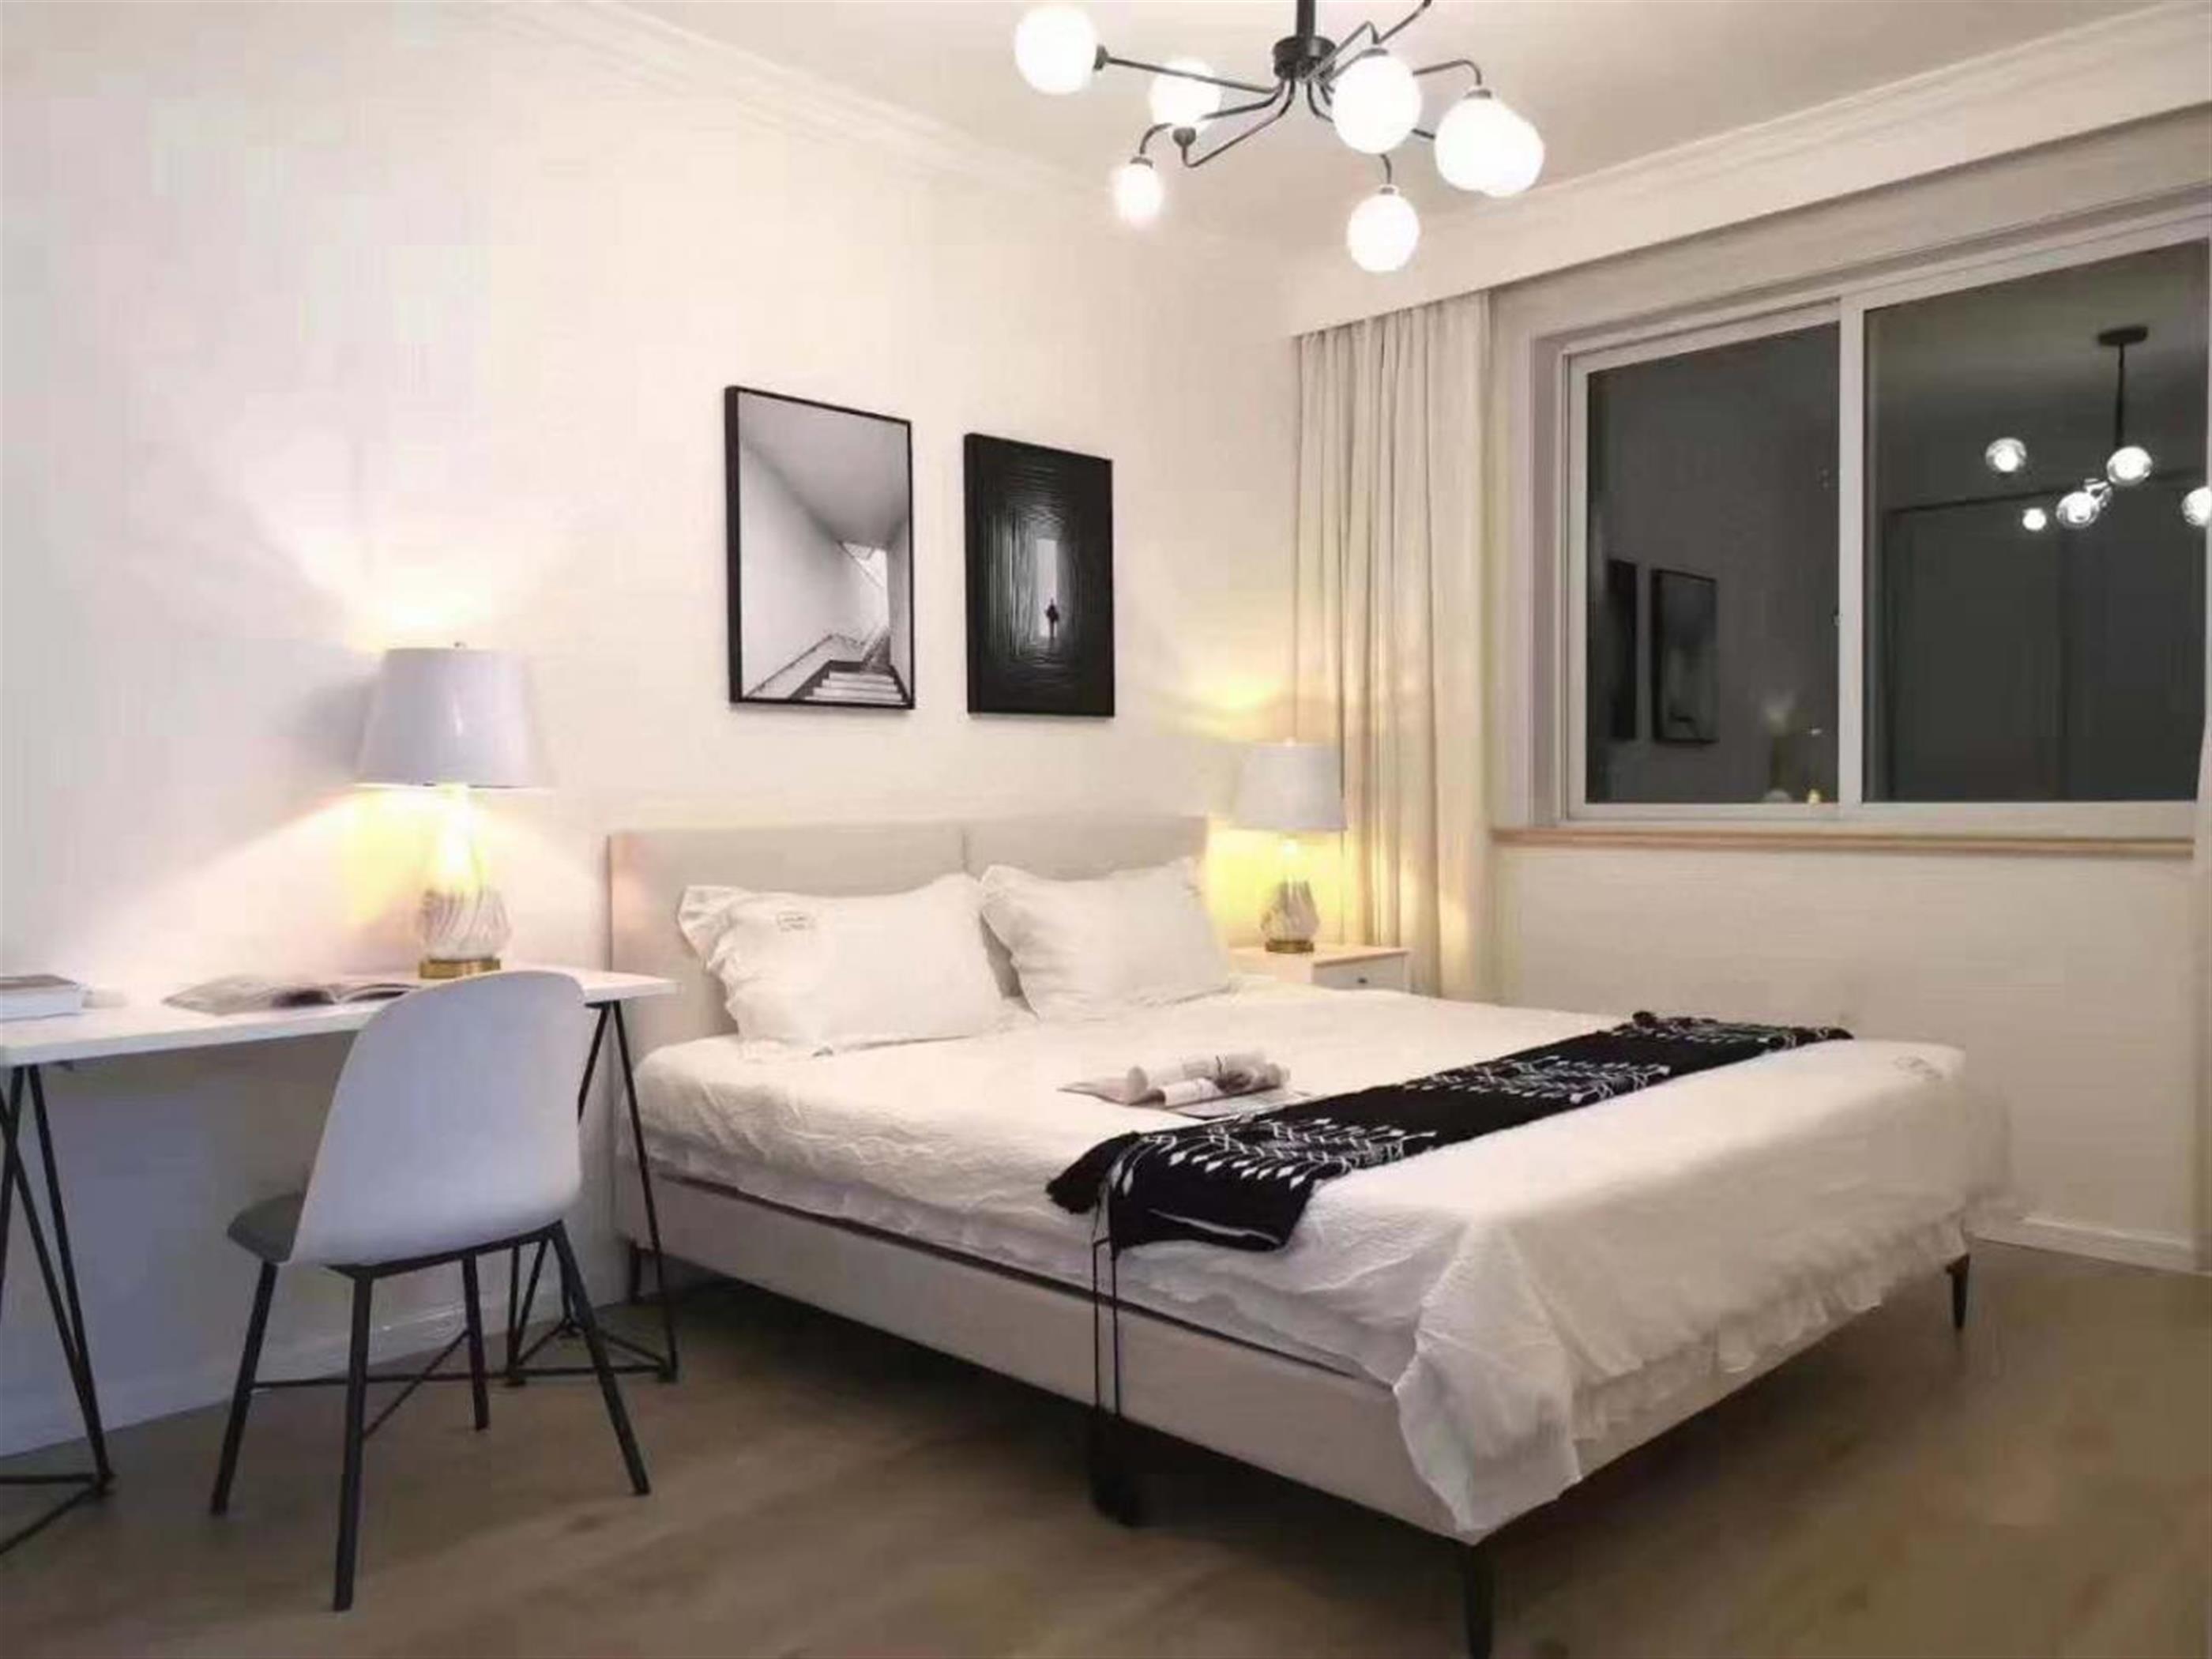 big bedroom Renovated Bright 1BR FFC Walk-up Apt Nr LN 1/10/12 for Rent in Shanghai